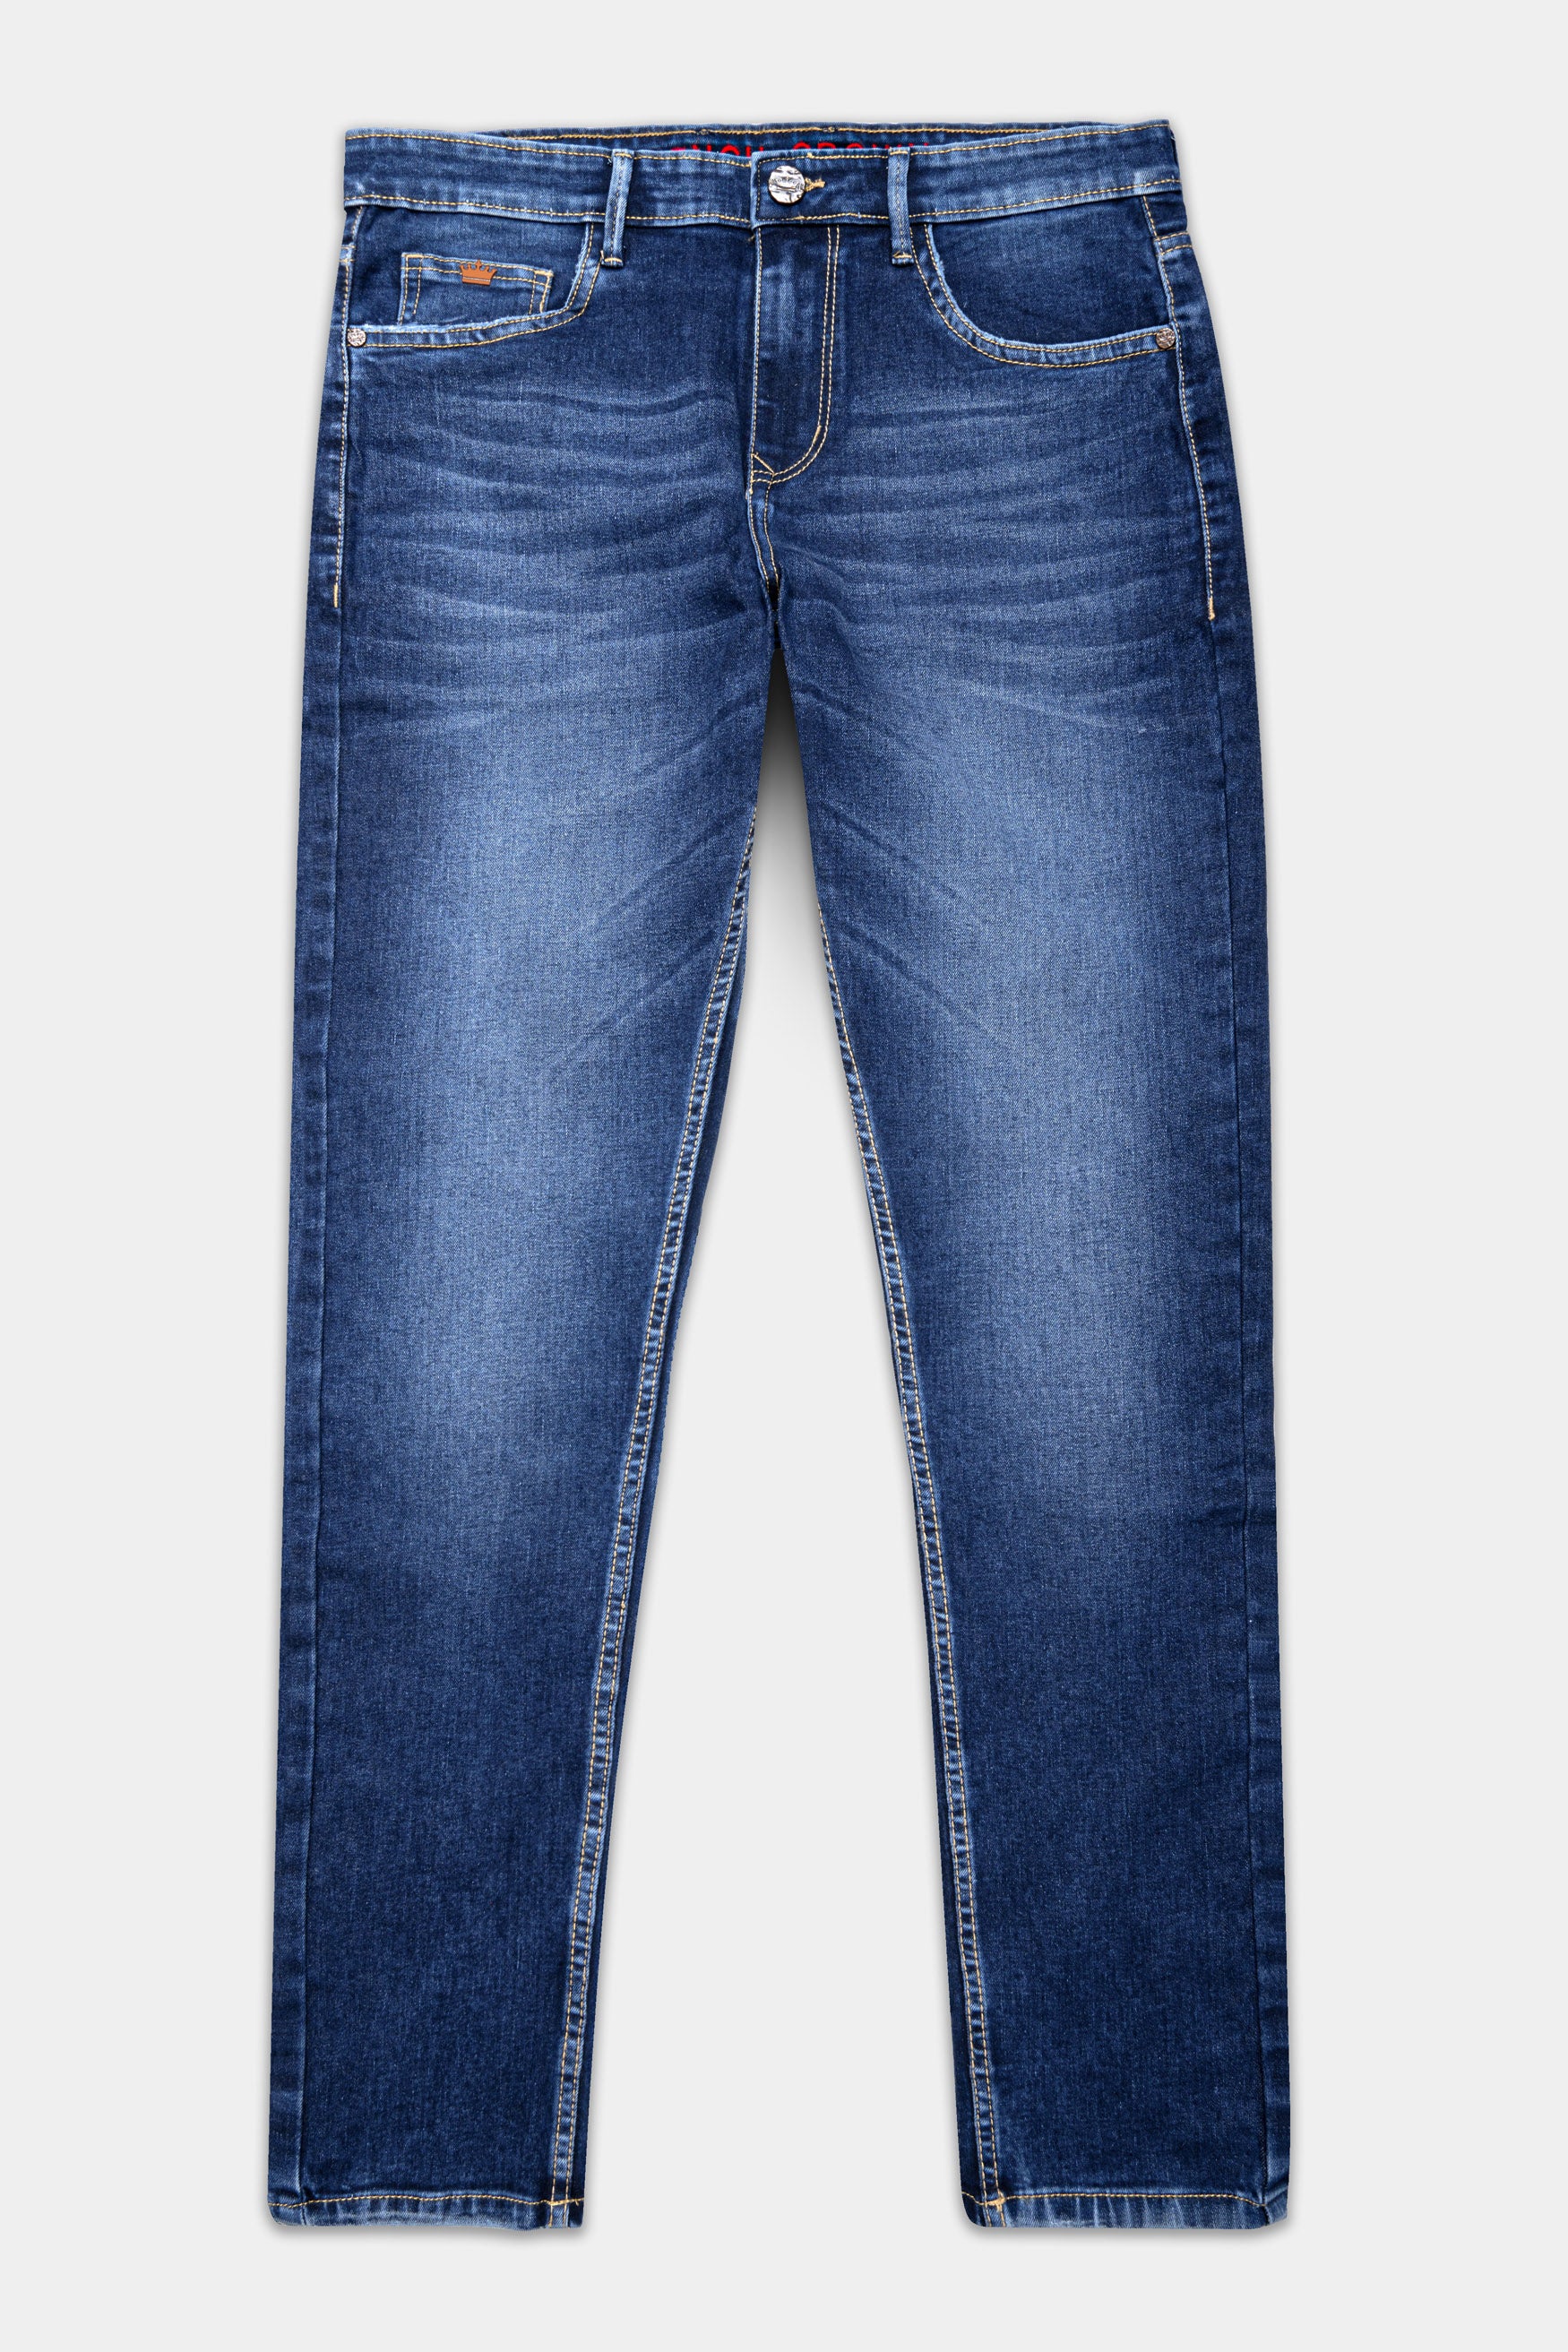 Denim Jeans Company in Attapur,Hyderabad - Best Jeans Retailers in Hyderabad  - Justdial